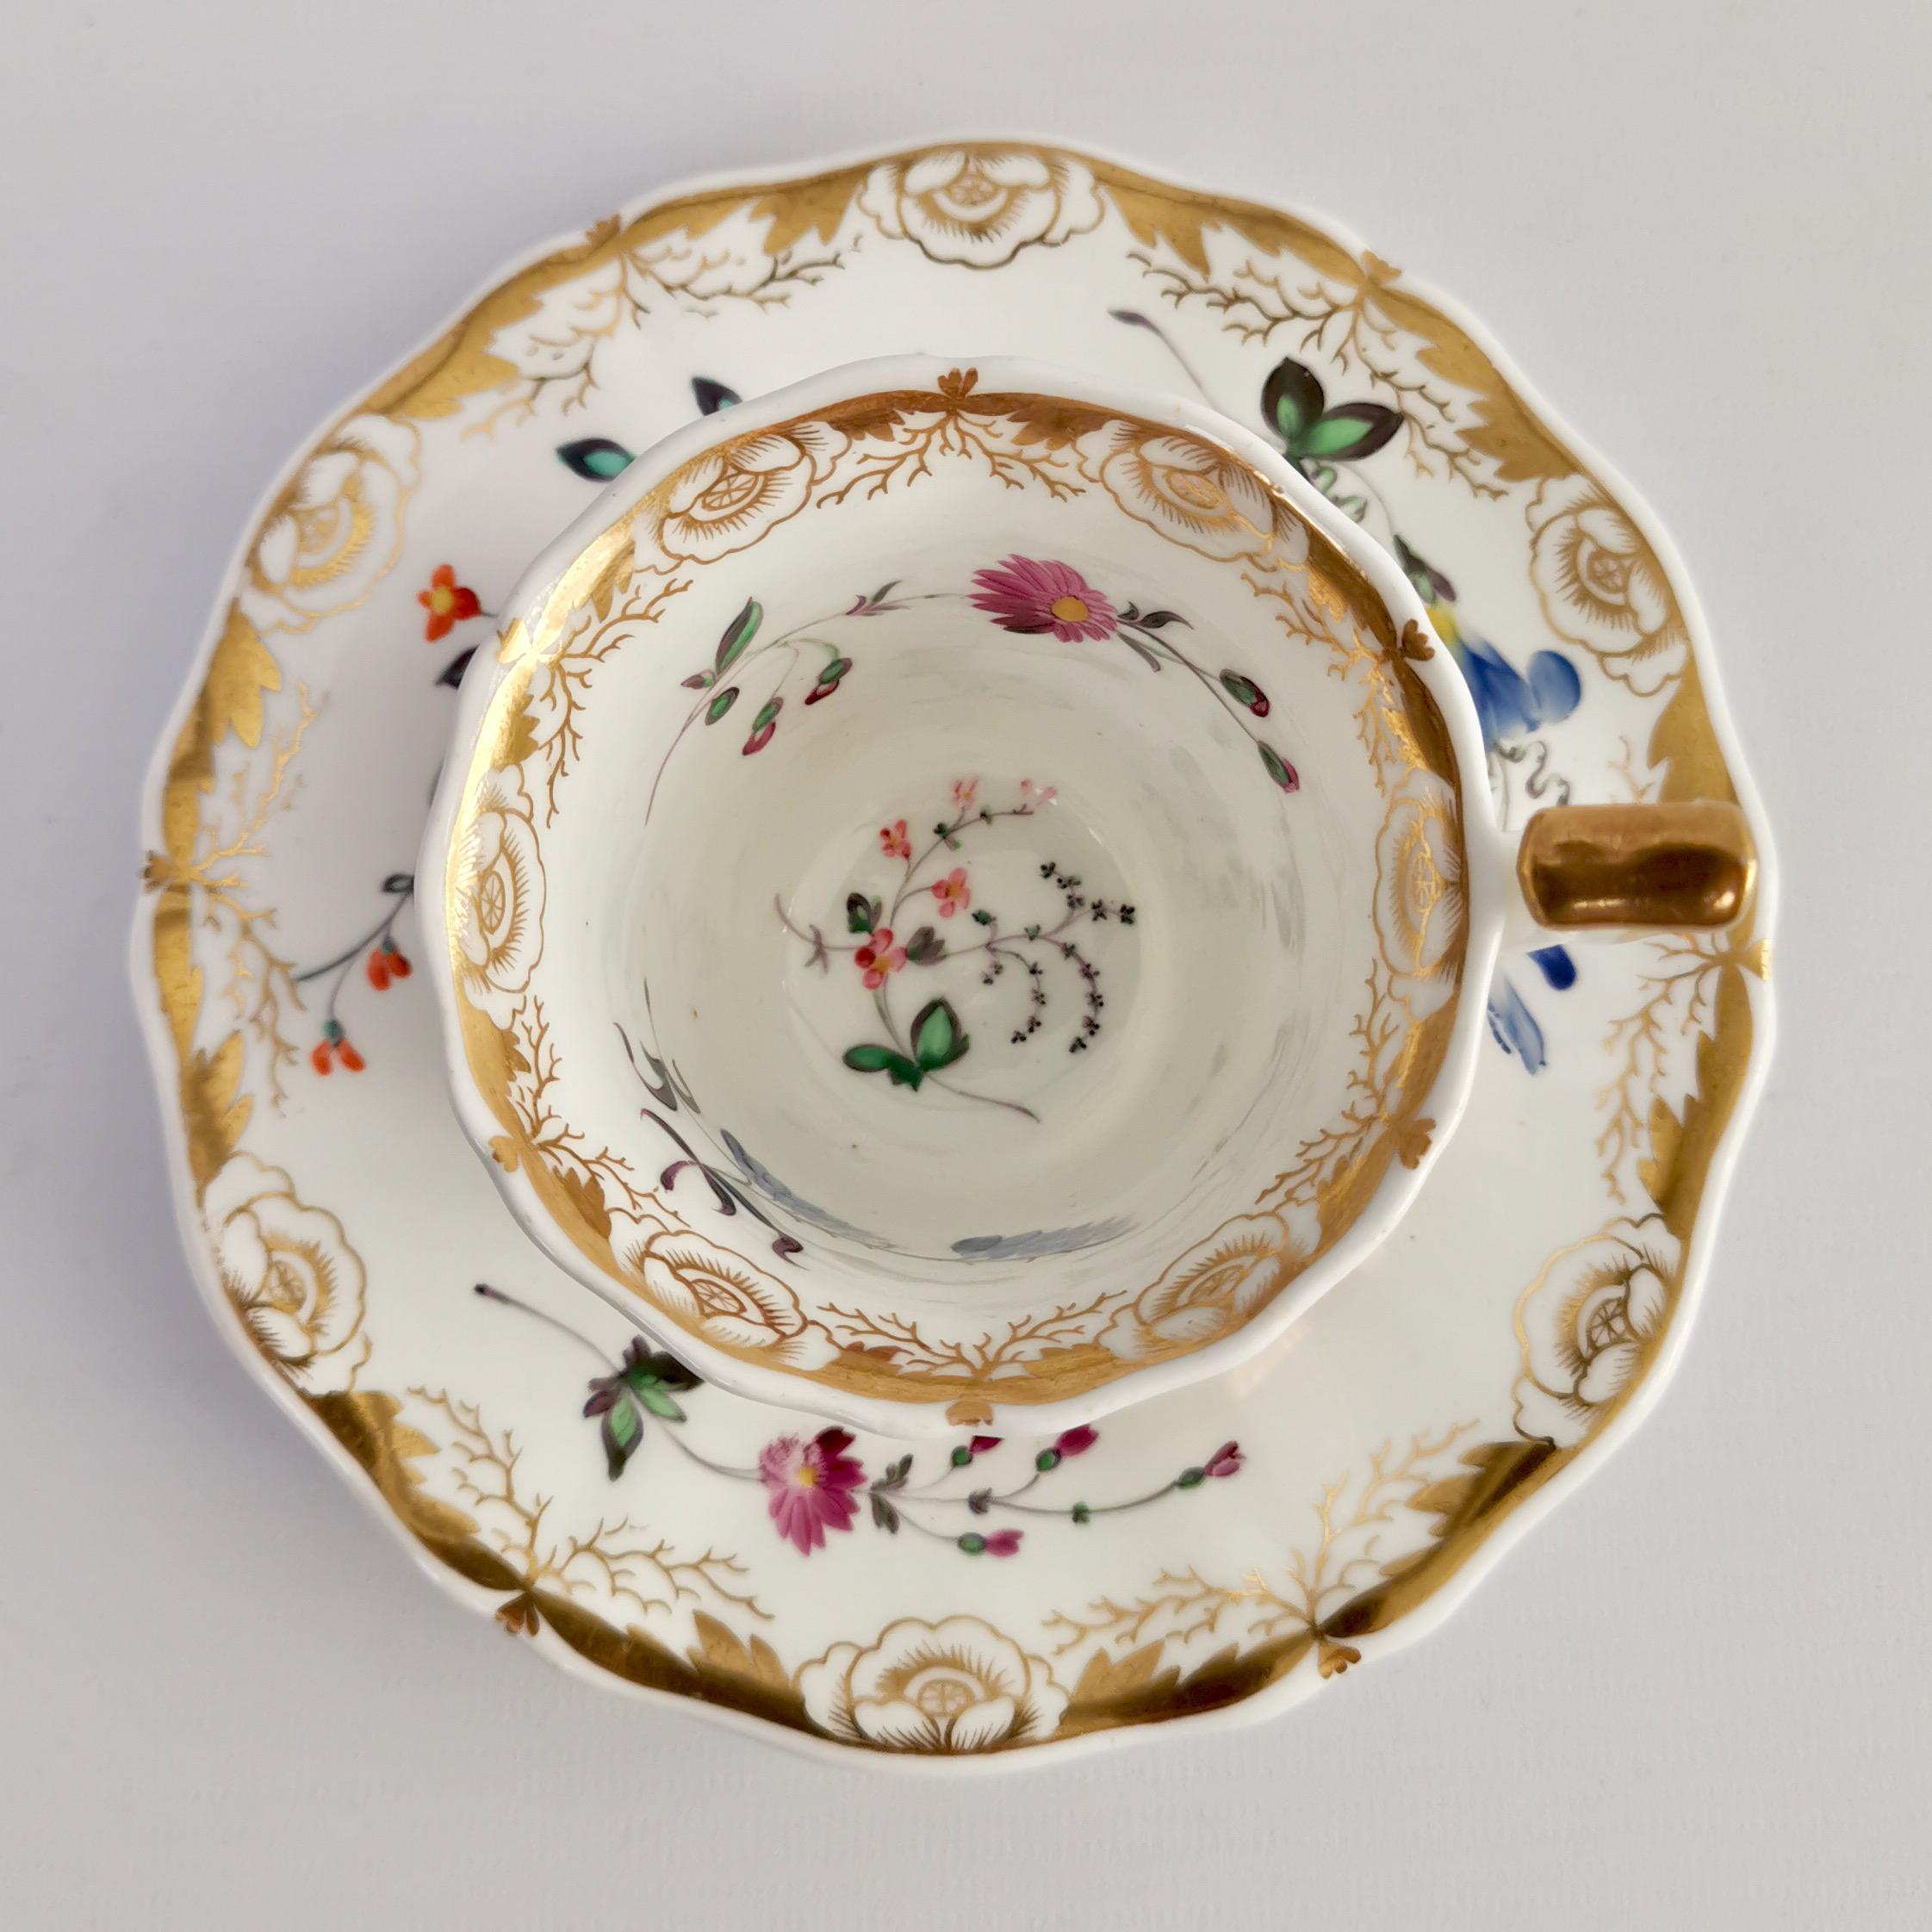 Early 19th Century Staffordshire Porcelain Teacup Trio, White with Flowers, Regency, 1825-1830